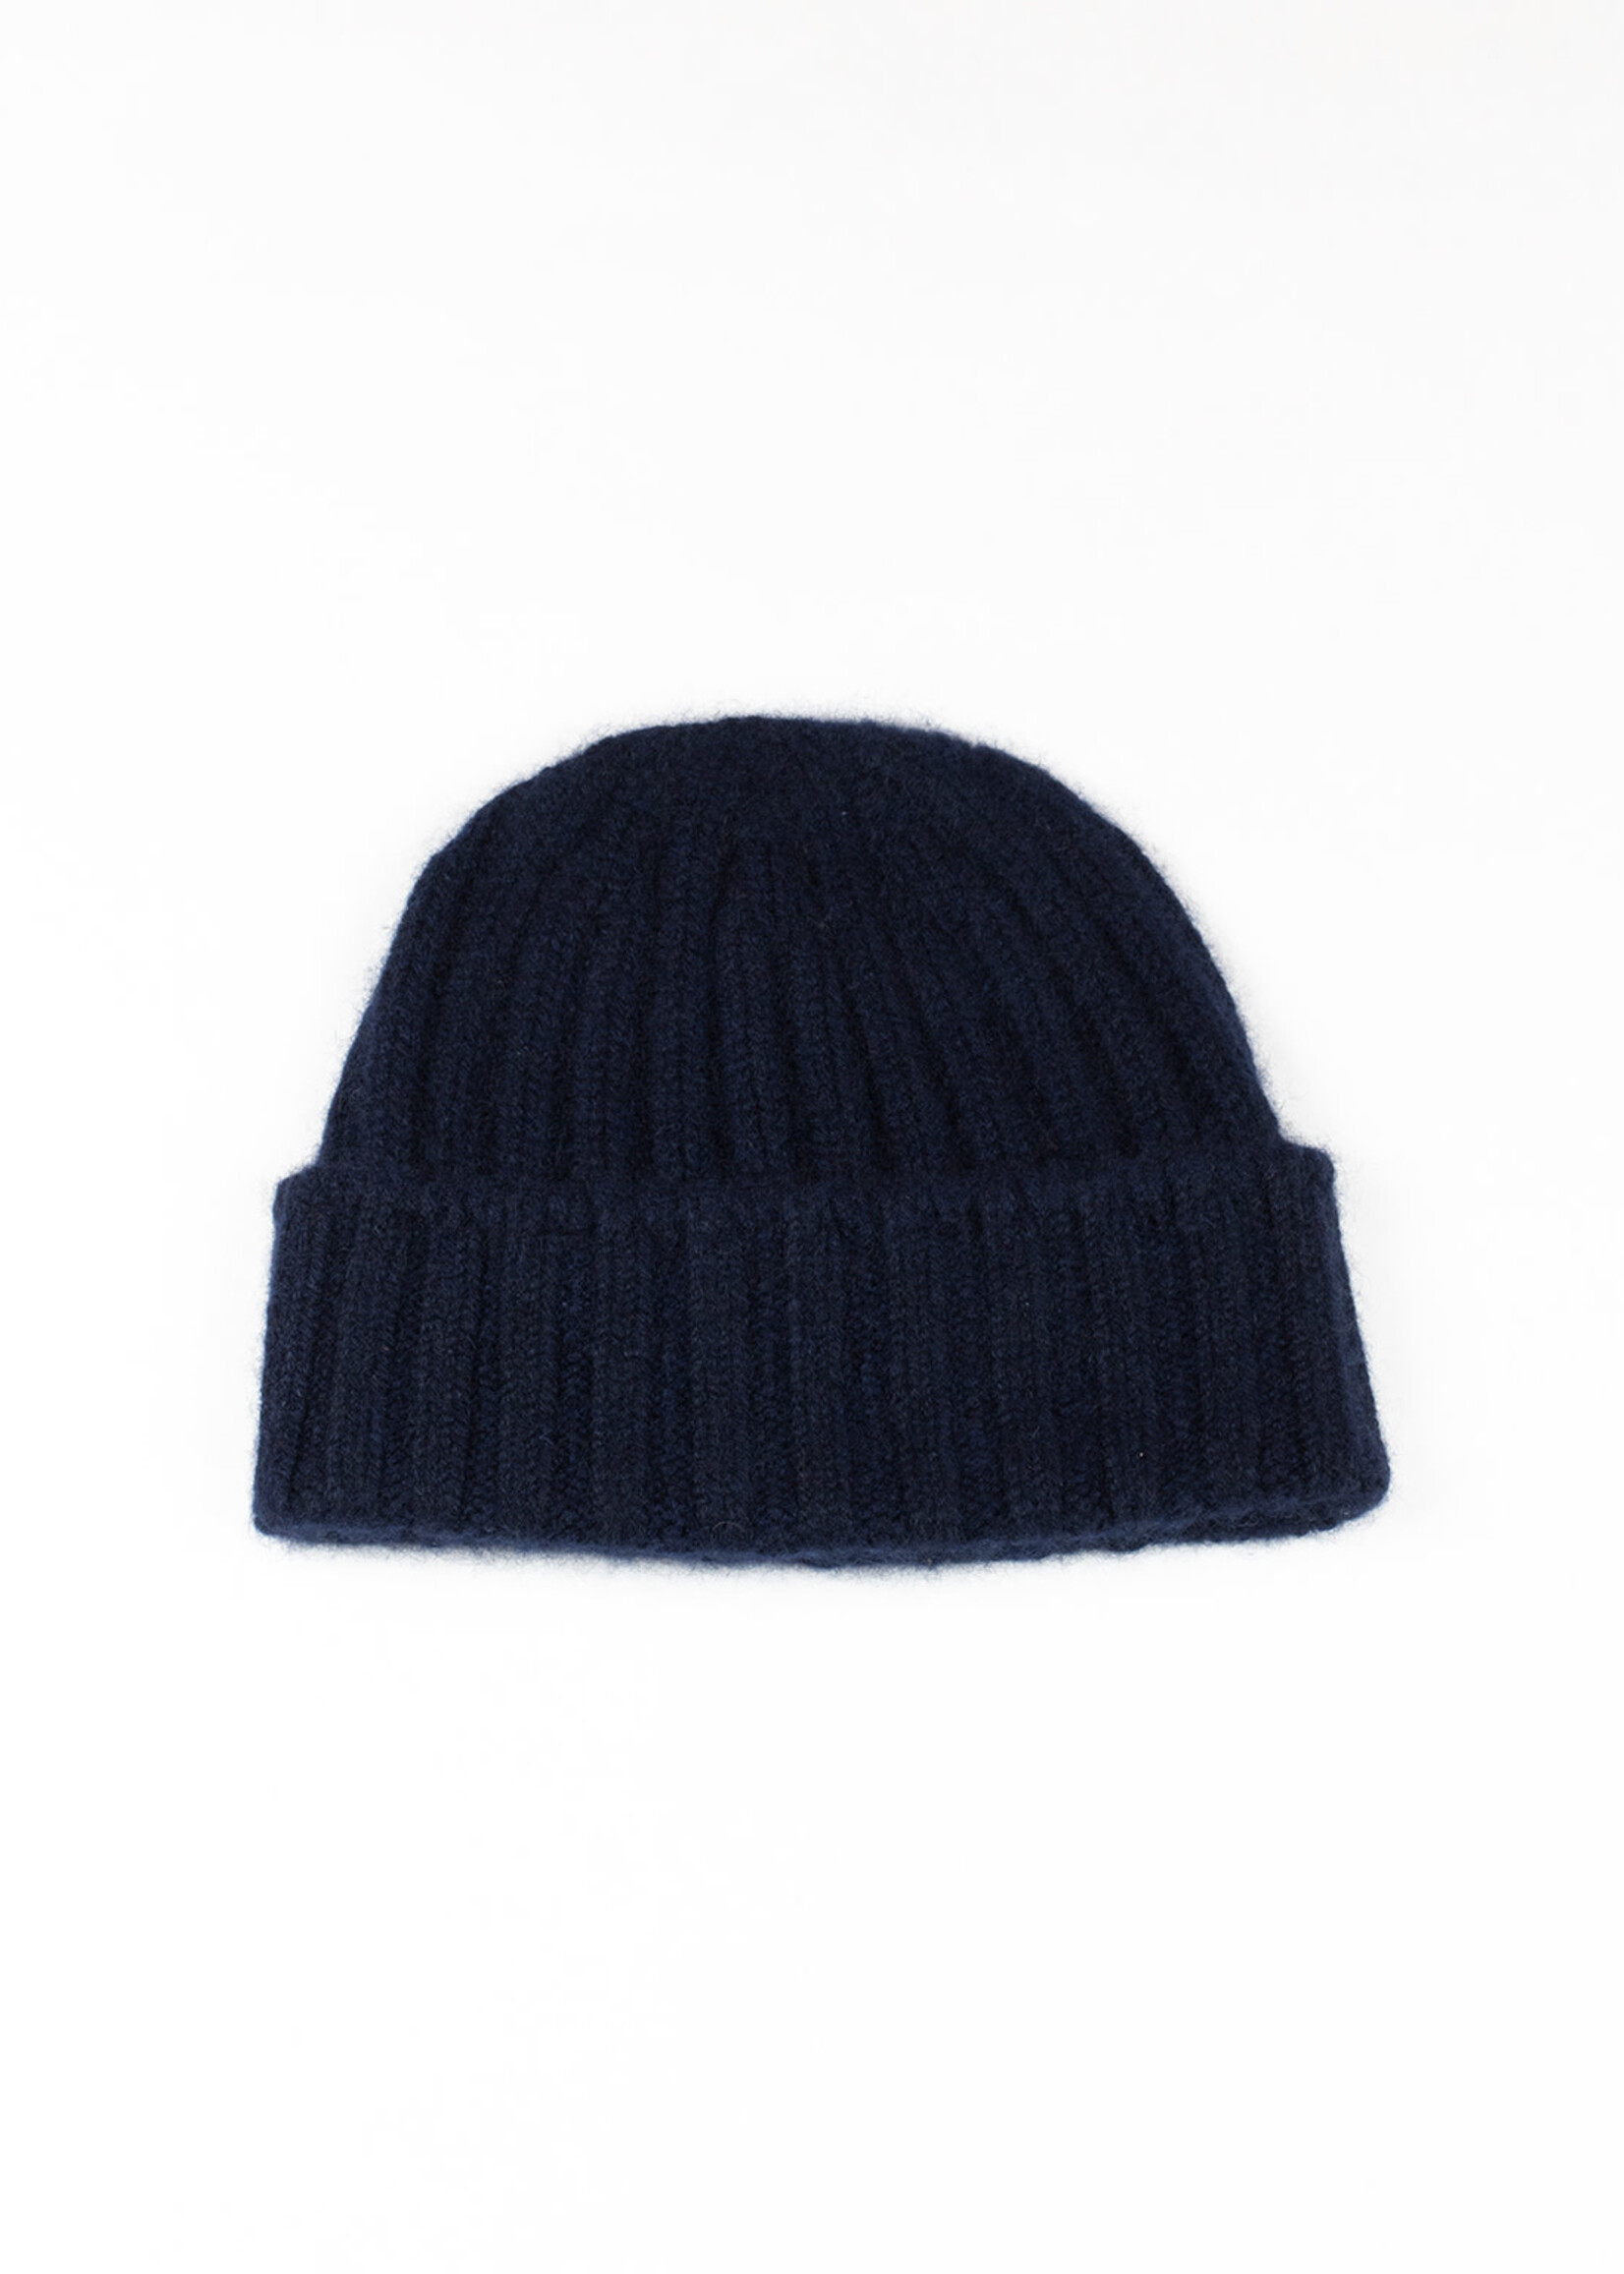 Cableami Cashmere 2x2 Rib Cap  Navy